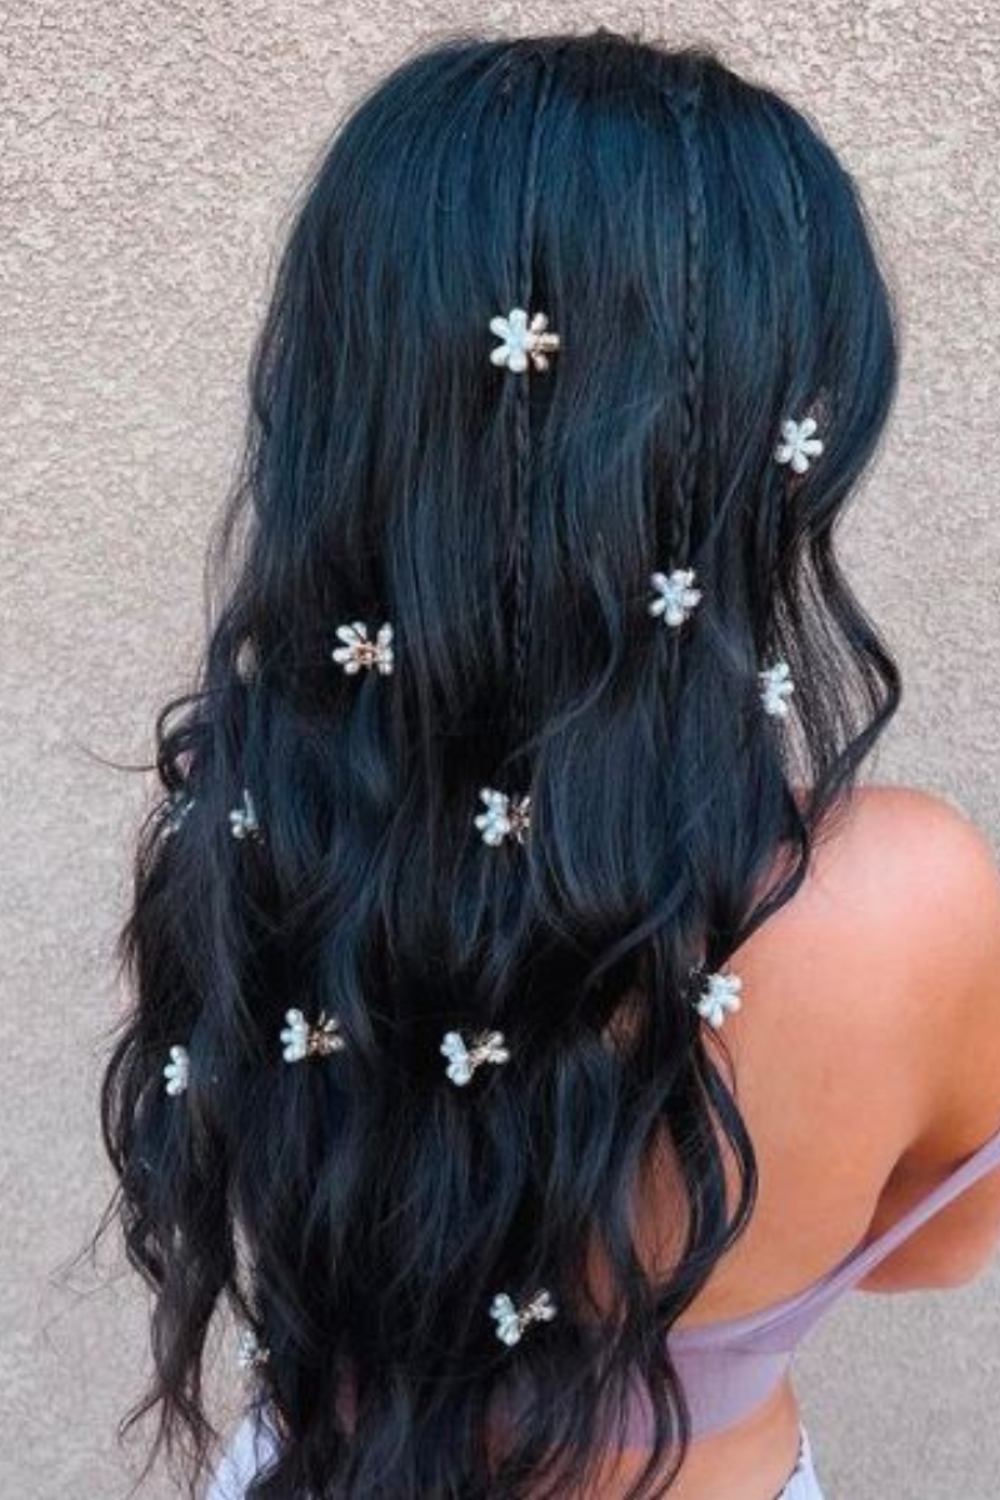 Music festival hairstyle - mini braids and flowers